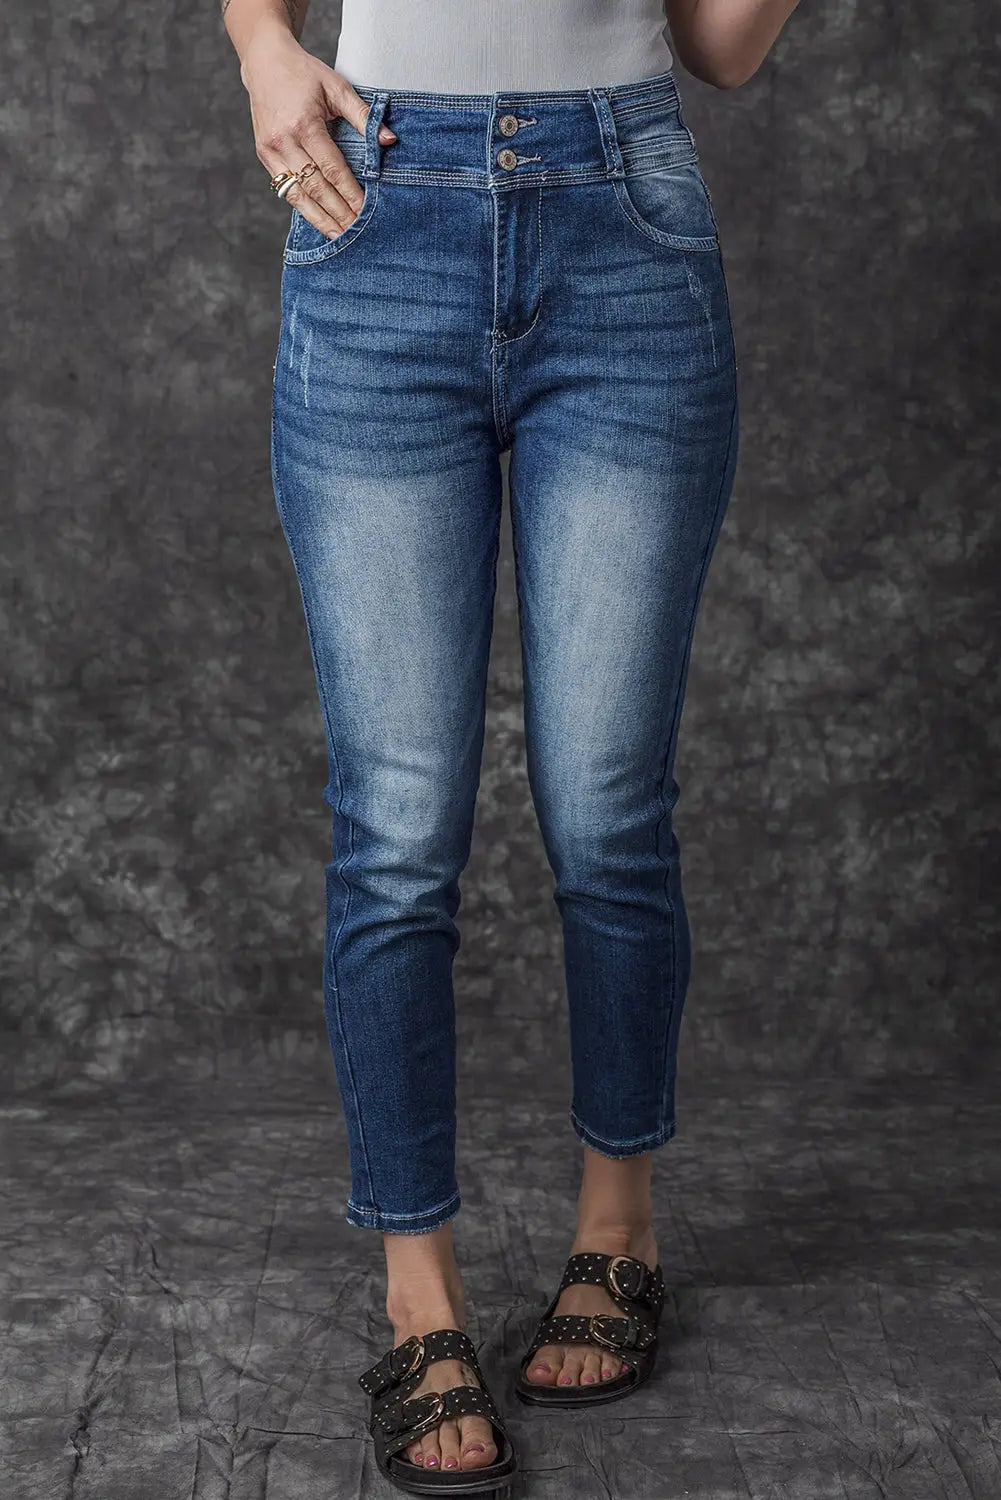 Blue vintage washed two-button high waist skinny jeans - 6 / 71% cotton + 27.5% polyester + 1.5% elastane - bottoms